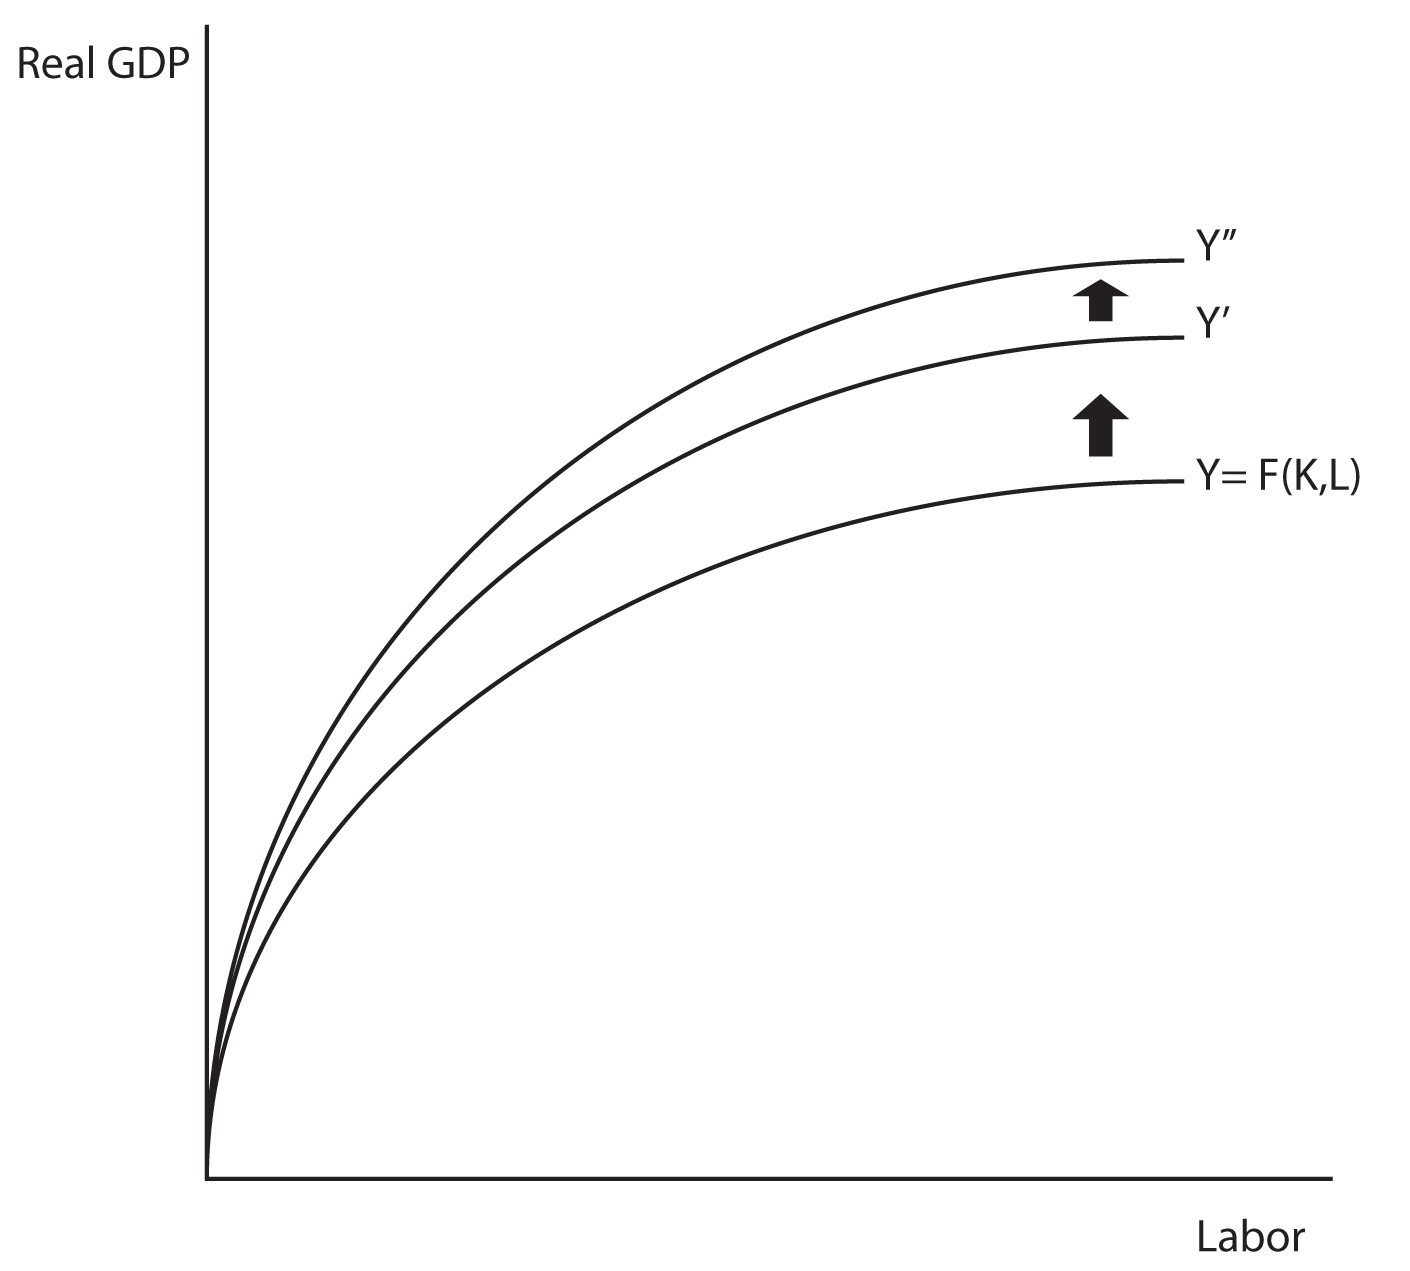  image 4.02: Here we have the first quadrant of a Cartesian coordinate system with no numerical values assigned to it. The y coordinate is represented by "Real GDP" and the x coordinate by "labor". Three lines curve upward from the origin, spreading farther apart and curving to a more horizontal position as the x-axis increases. The first line, which appears lowest on the y-axis, is labeled Y. The second line, shown as higher on the y-axis, is labeled Y’.  The third line, which appears highest on the y-axis, is labeled Y”. There is a greater distance between the first and second curved lines than between the second and third curved lines. Between the first and second curved lines, there is an arrow pointing upwards. Between the second and third curved lines, there is a shorter arrow pointing upwards. Beside the first line, there is an equation attached to the label Y. It reads, Y=F(K,L).